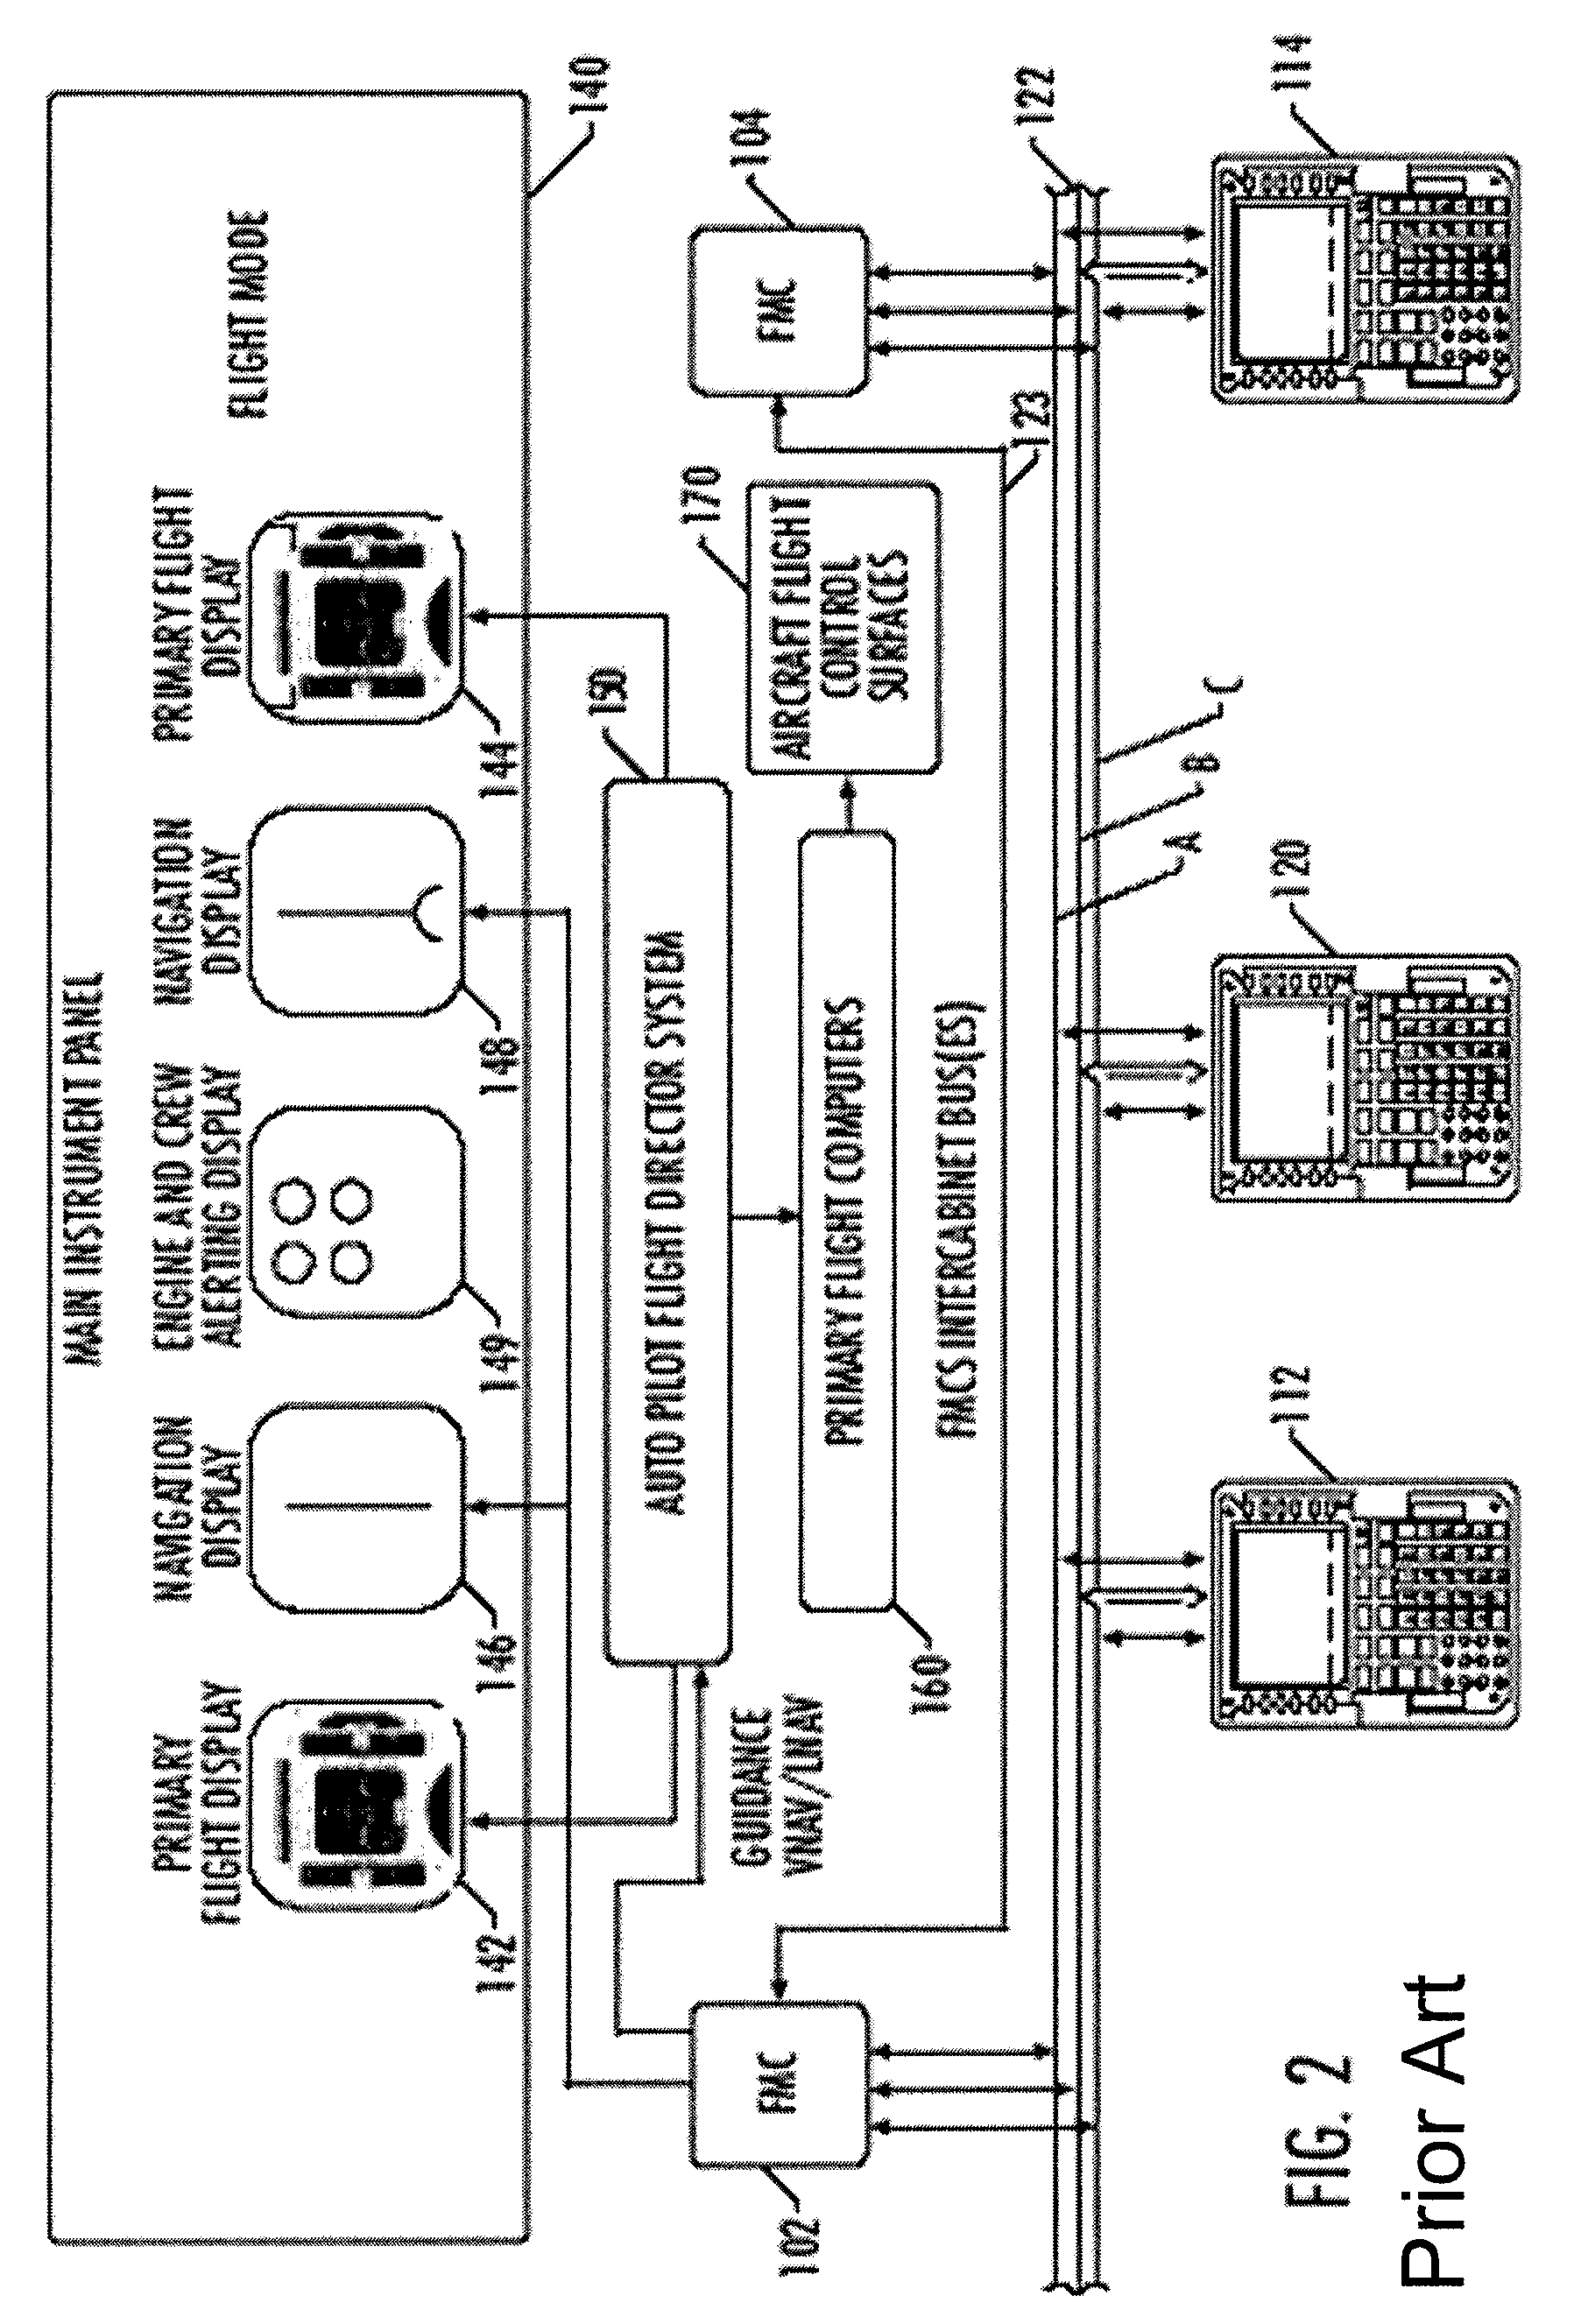 Integrated approach navigation system, method, and computer program product